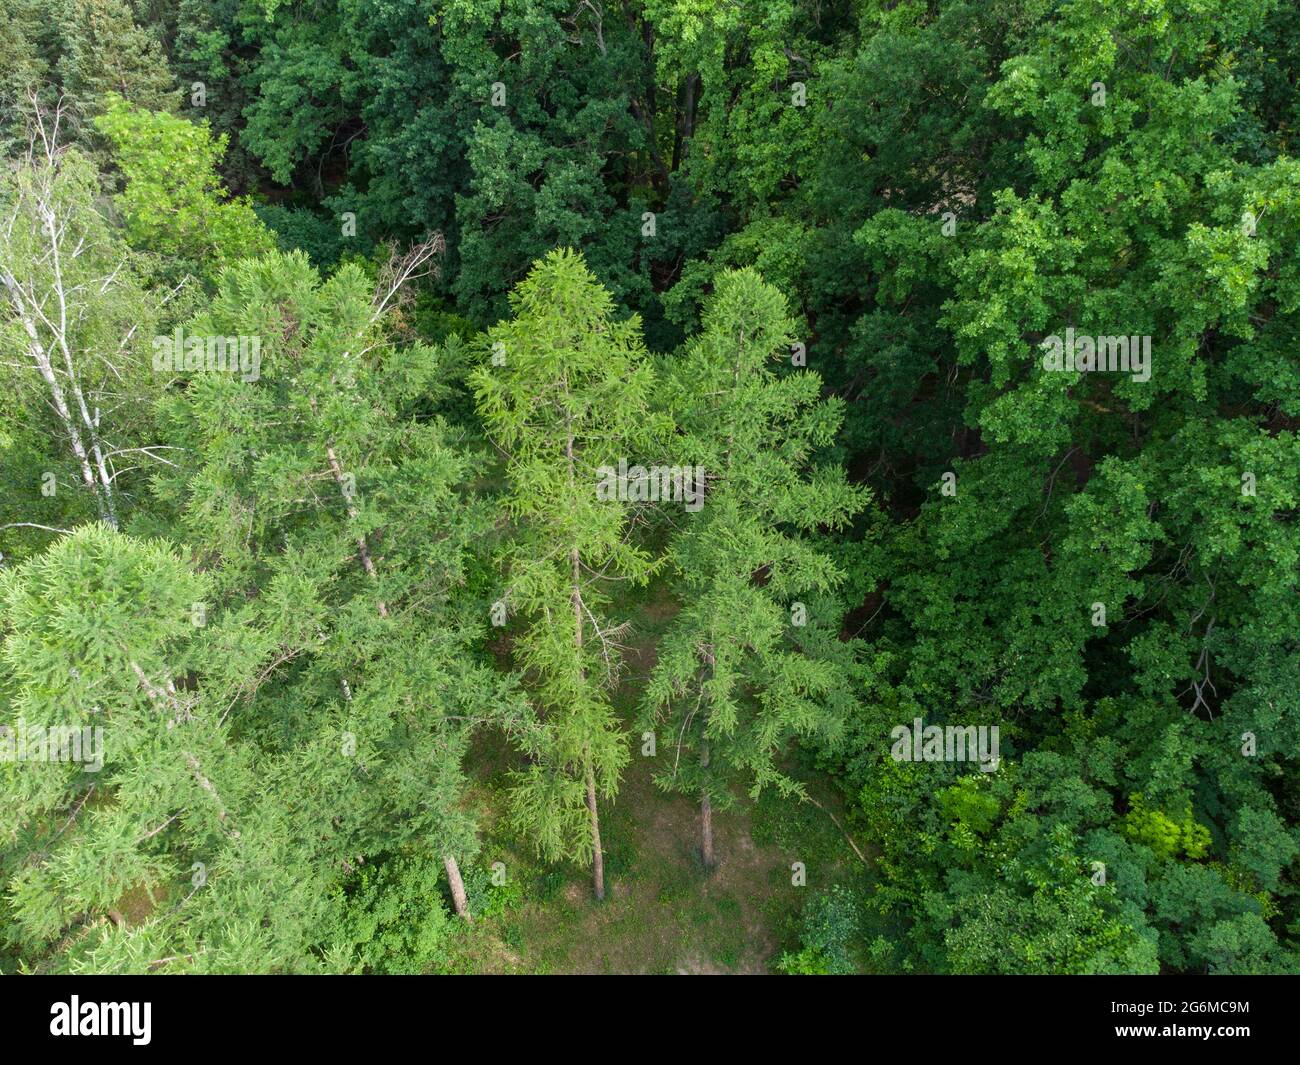 Spruce green young fur trees high up in forest, aerial view from drone. Evergreen pine trees summer nature Stock Photo